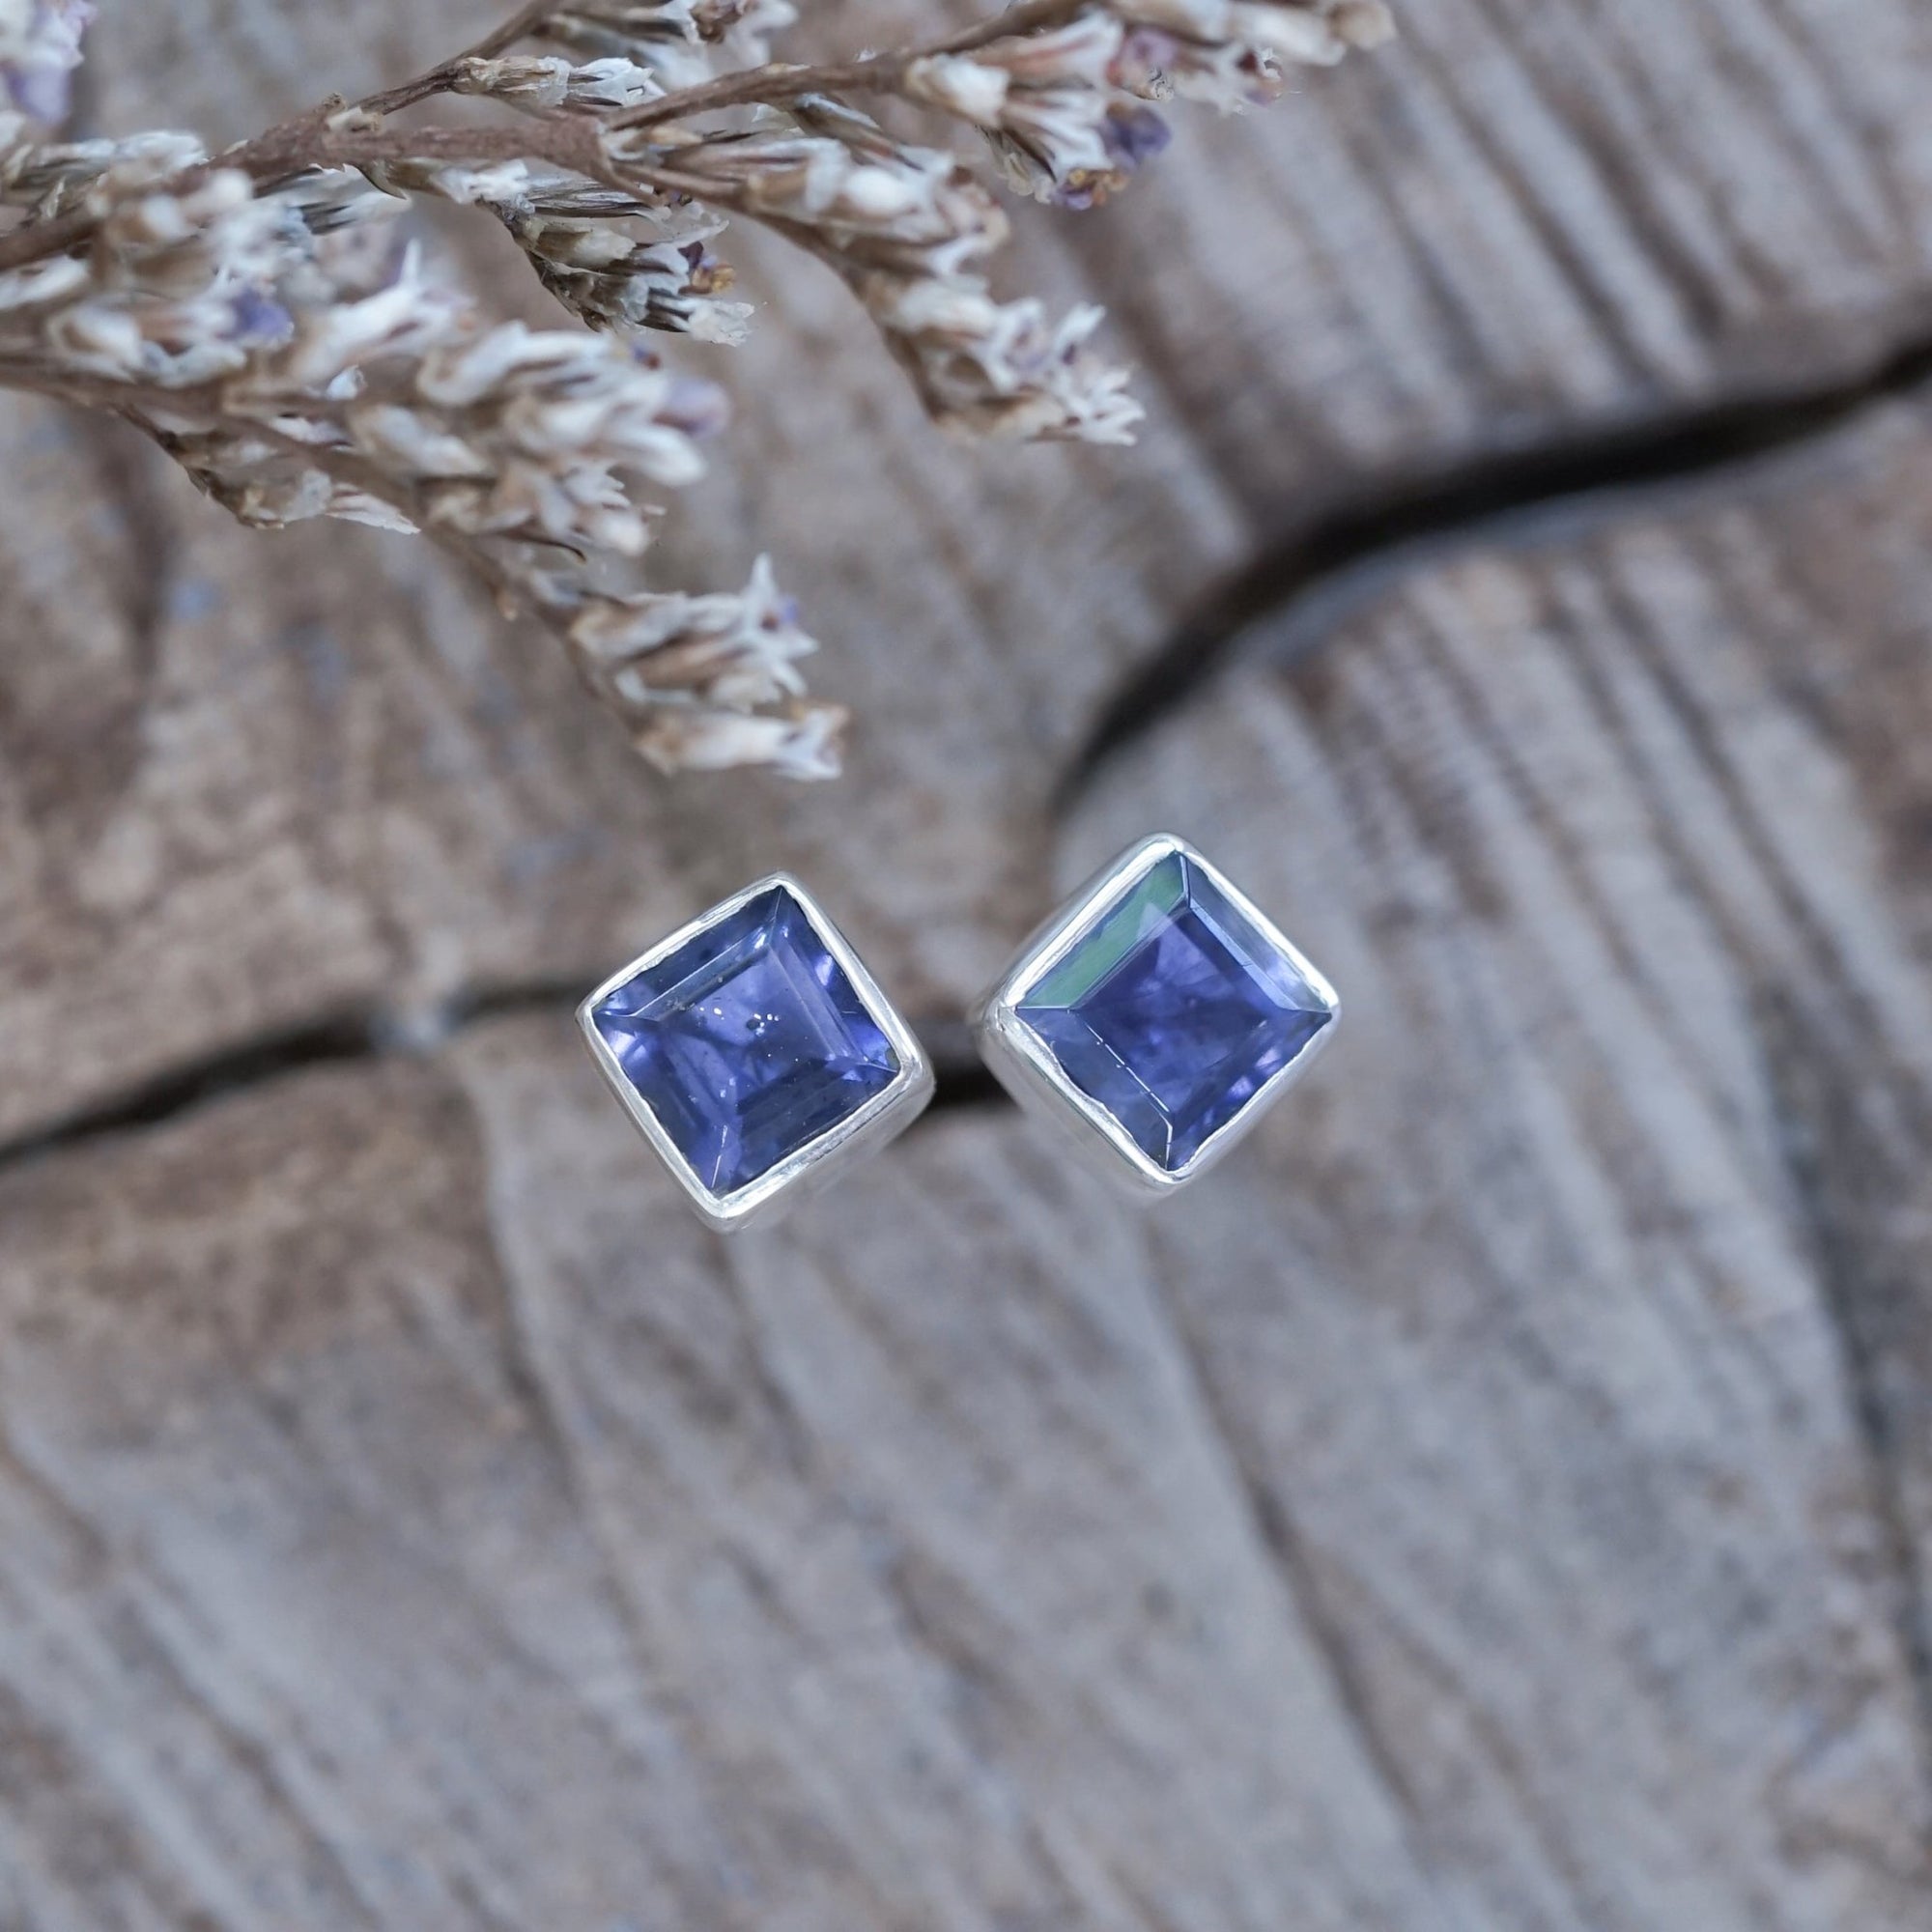 Iolite Earrings - Gardens of the Sun | Ethical Jewelry